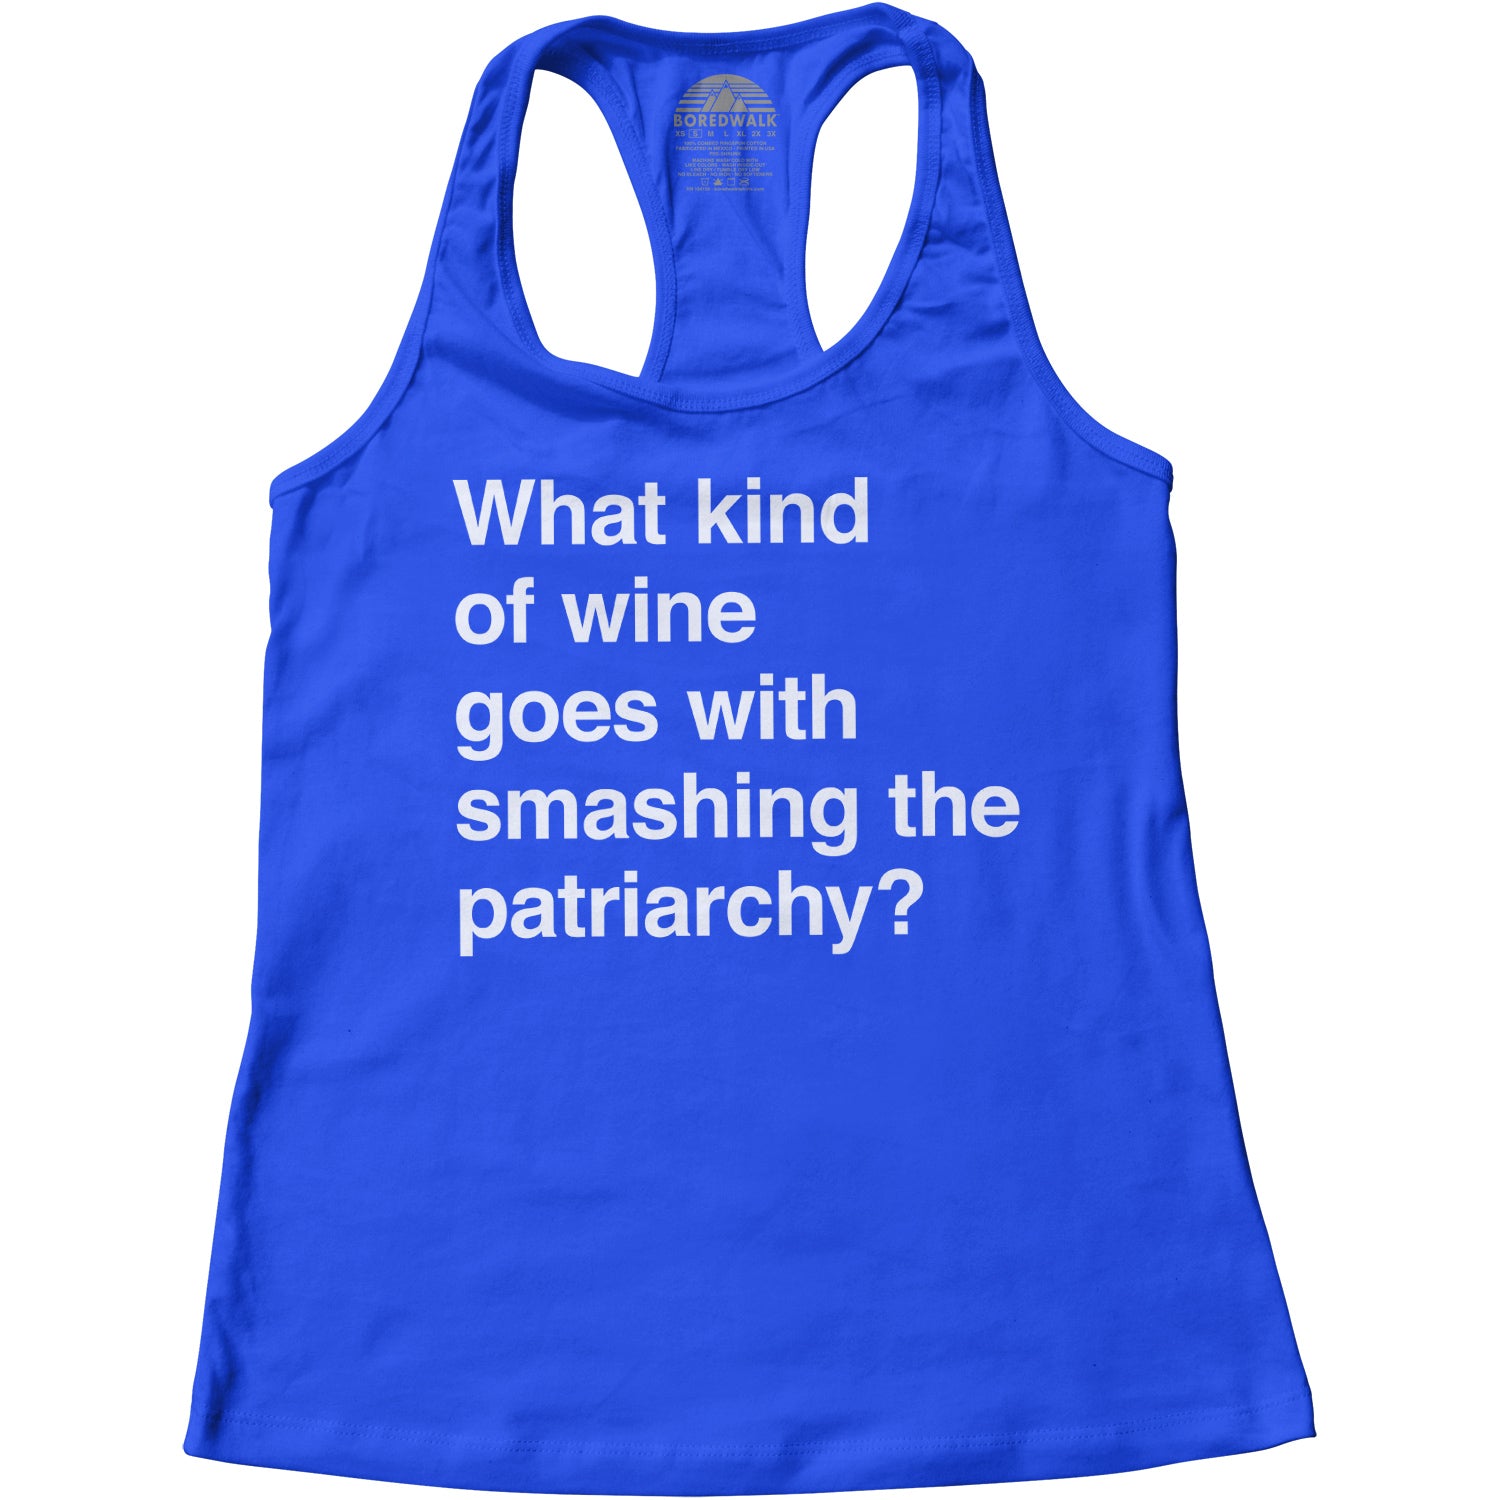 Women's What Kind of Wine Goes with Smashing the Patriarchy? Racerback Tank Top